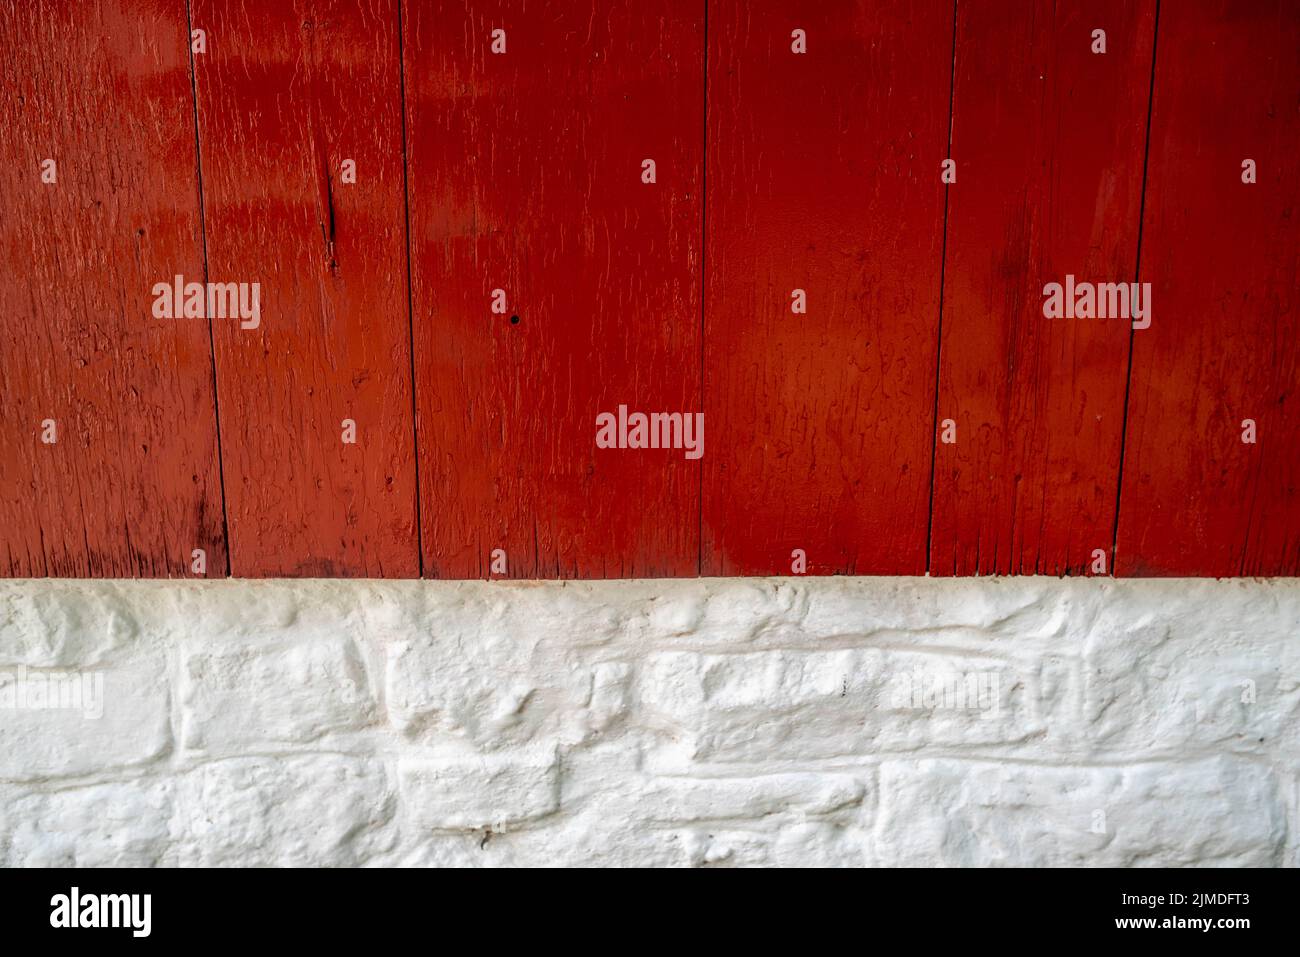 Bright red wood and whitewashed stone exterior wall close up. Stock Photo